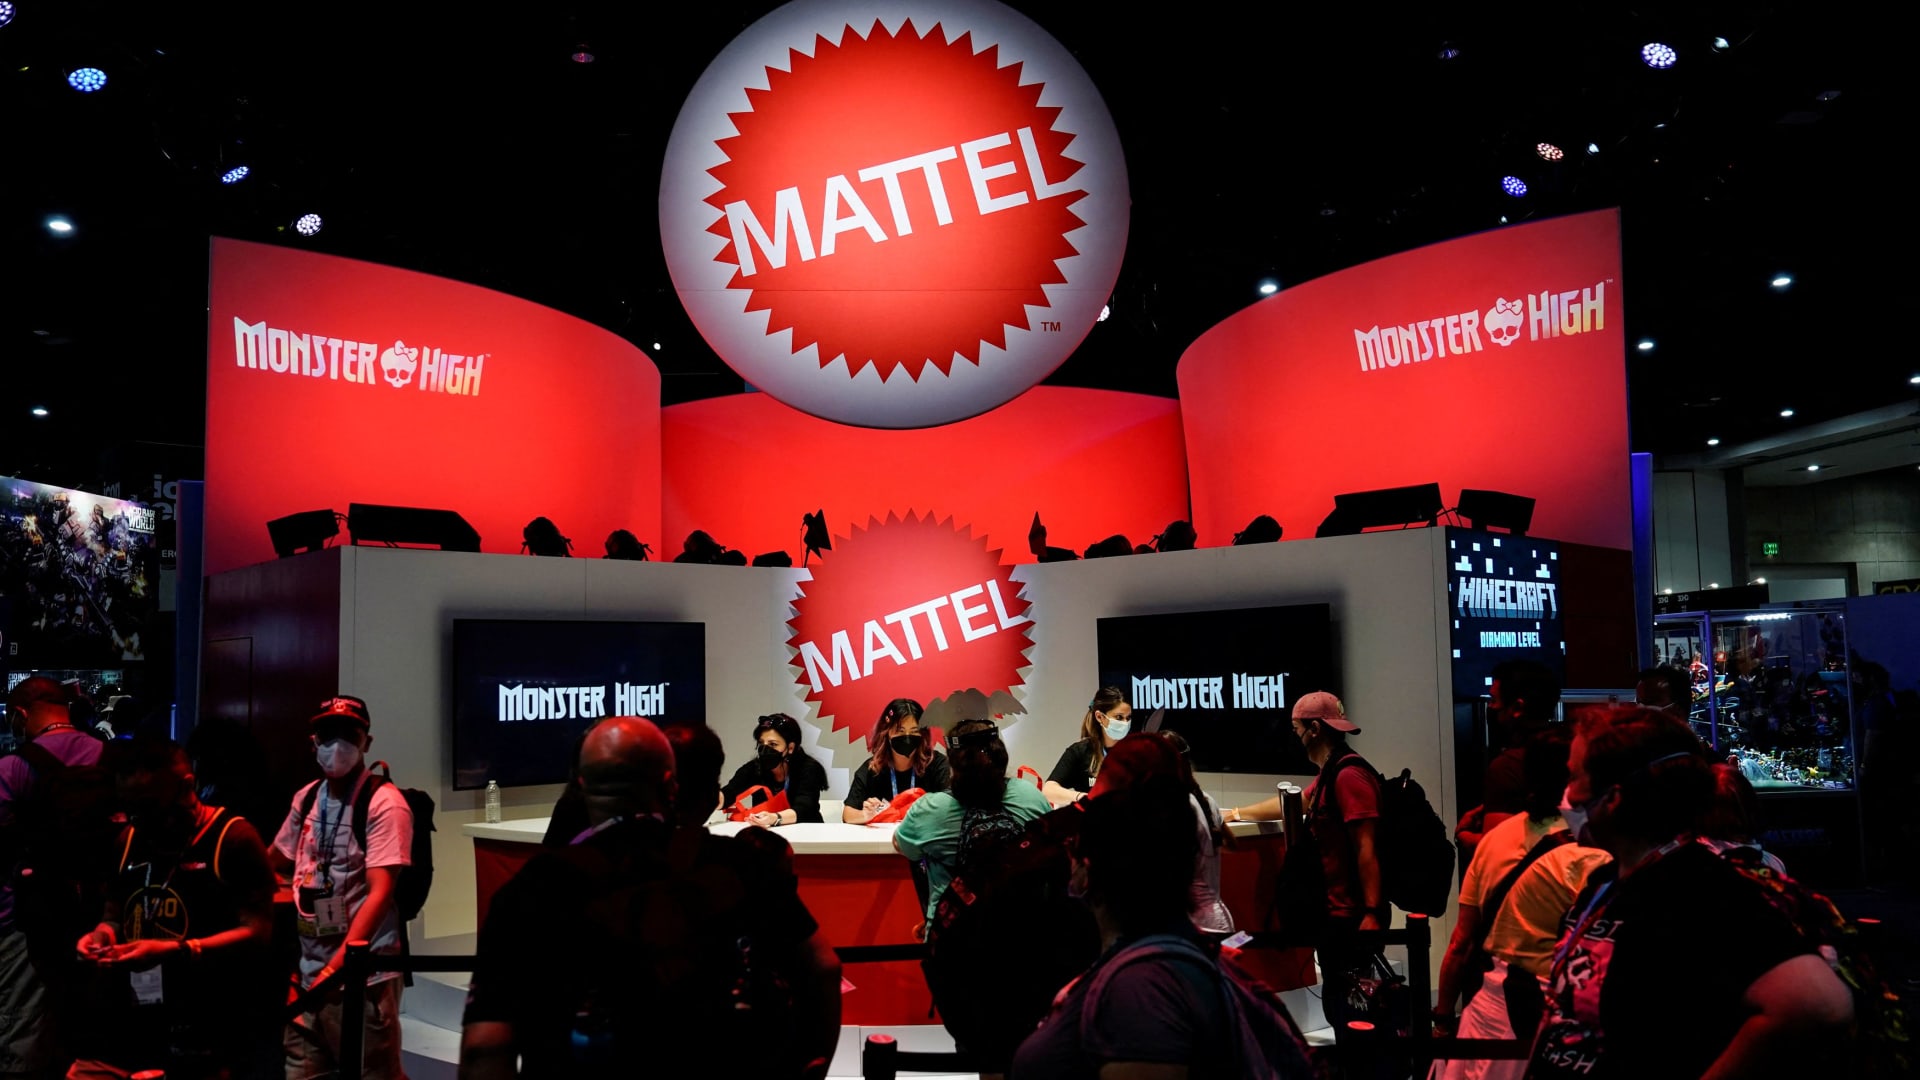 Toy company Mattel agrees to pay .5 million fine for misstatements in 2017 earnings, SEC says